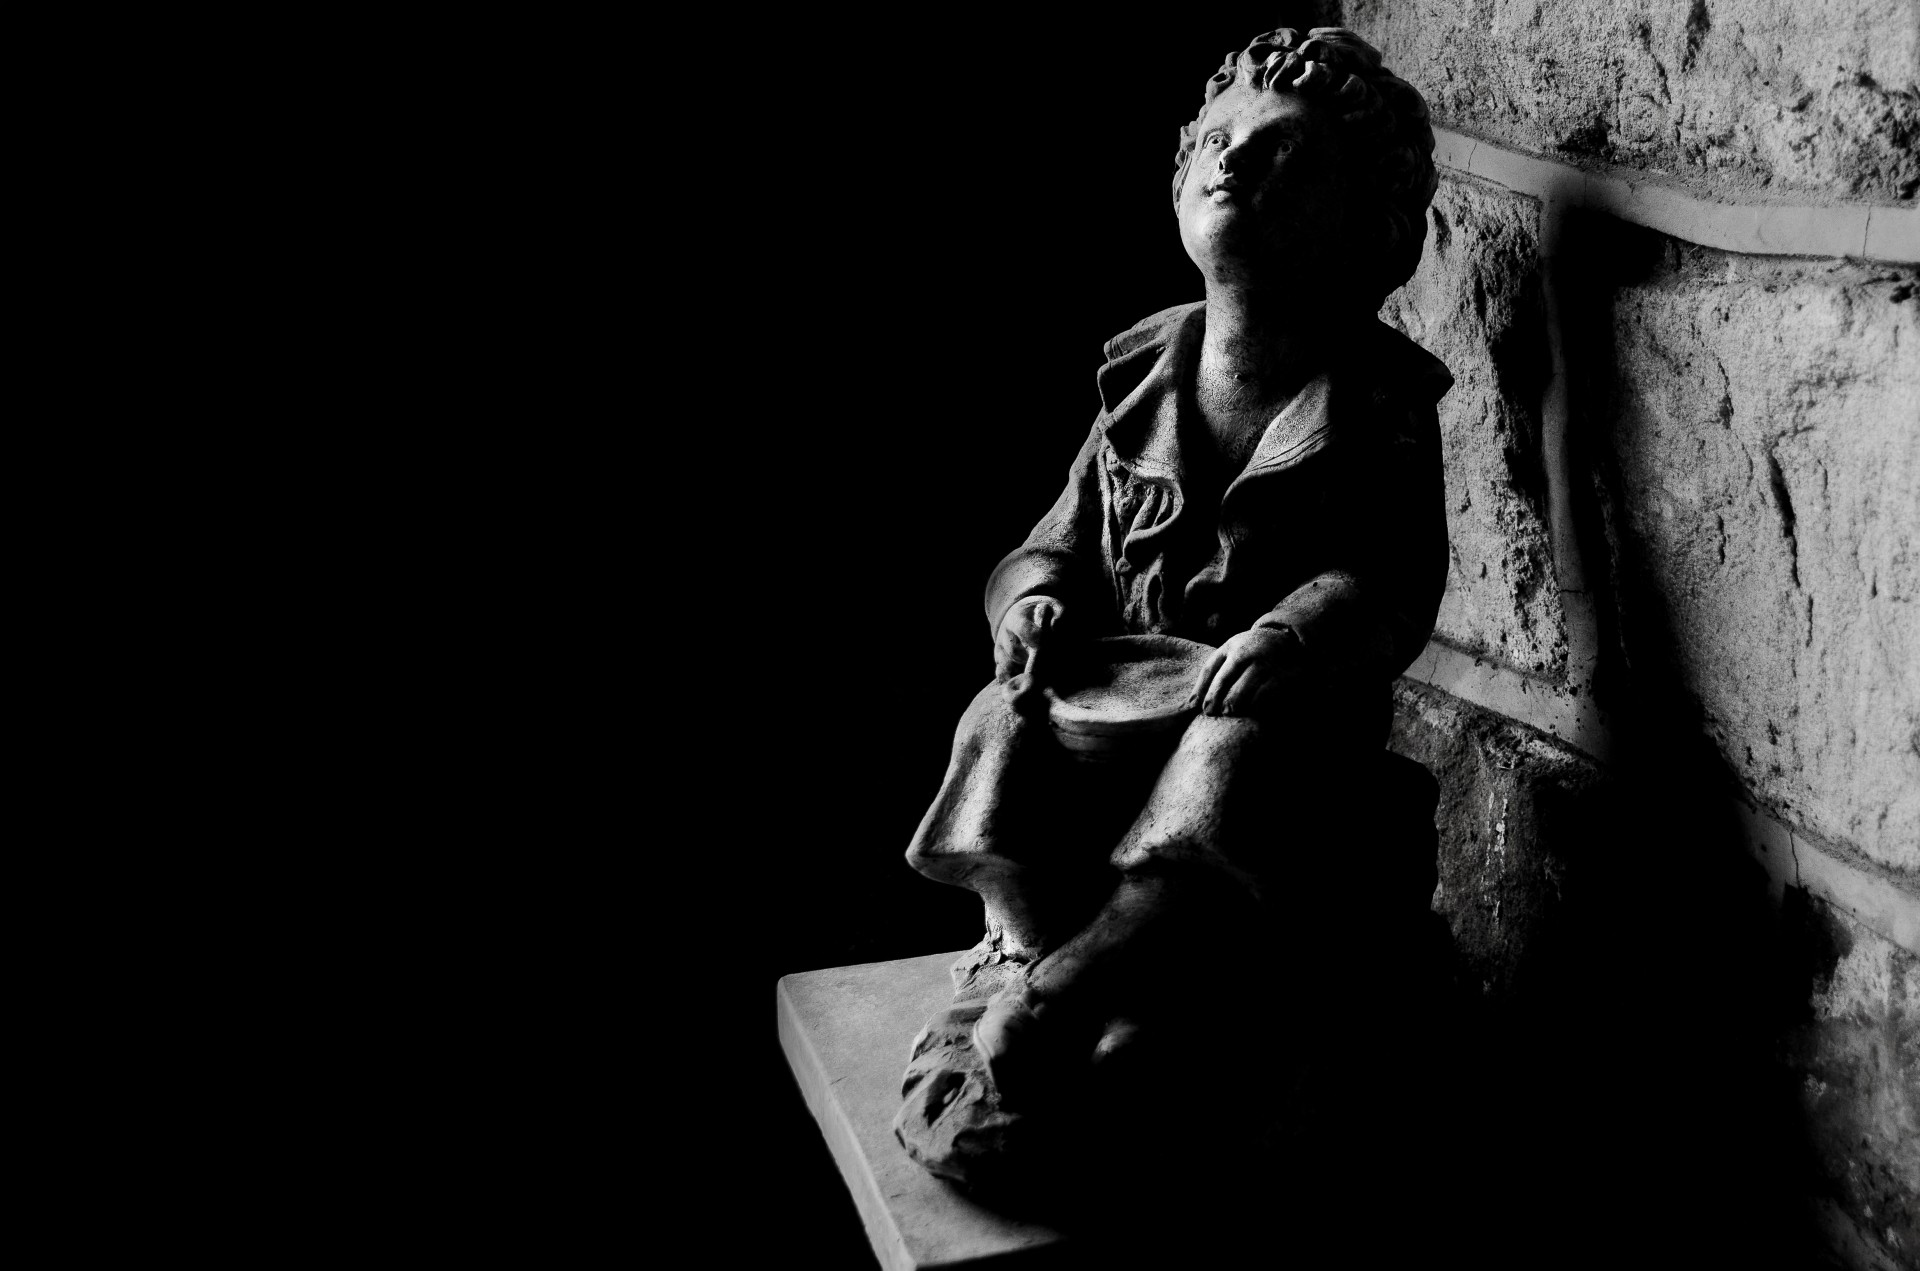 Sculpture Of A Child In The Shade